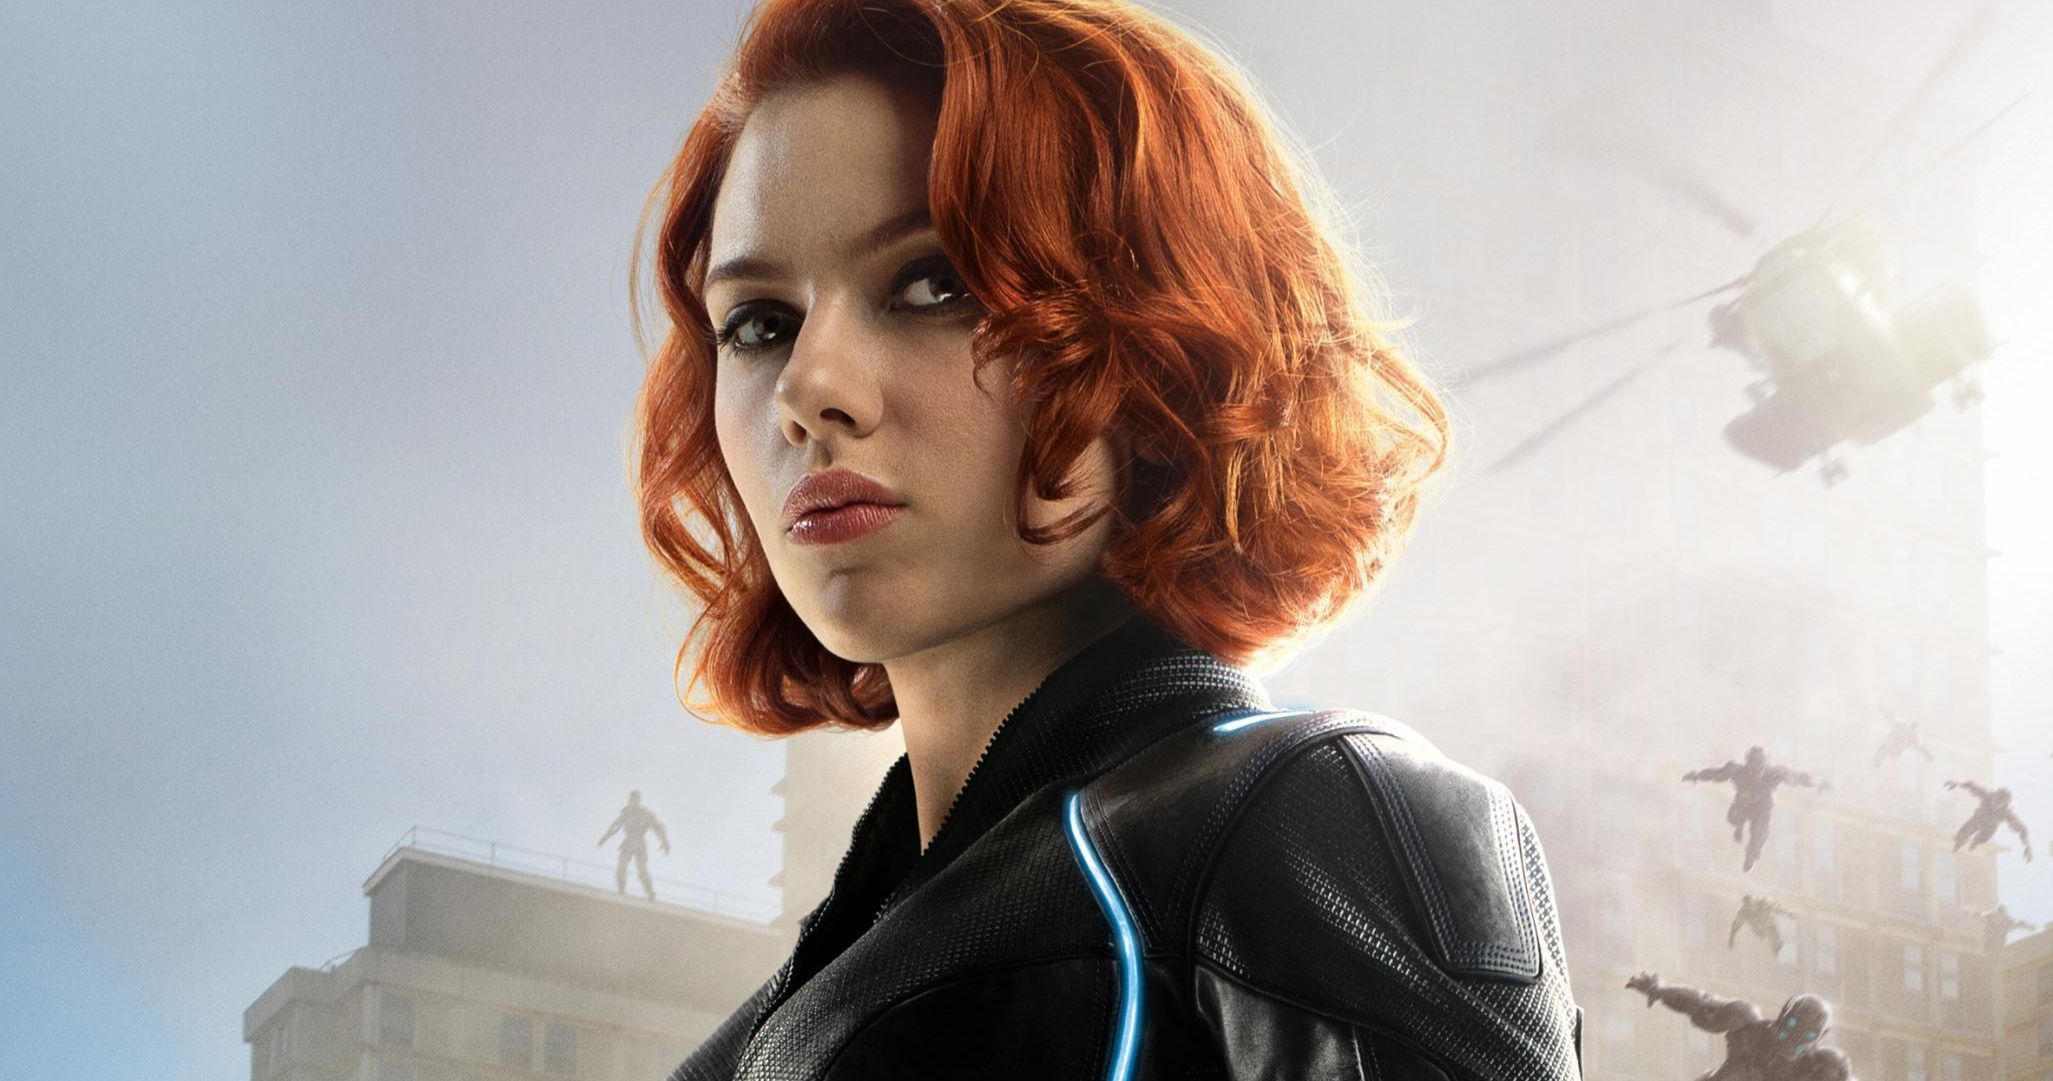 Black Widow D23 Footage Brings Big Action and a New White Suit